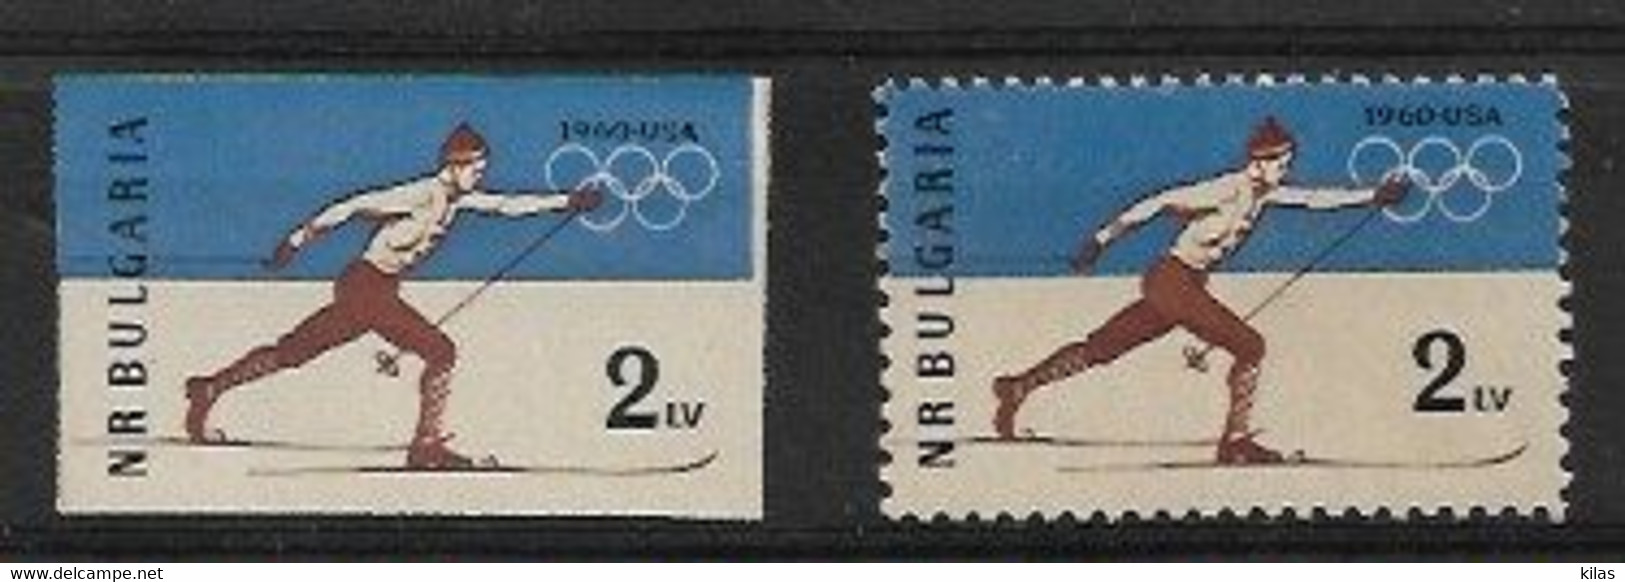 BULGARIA 1960 OLYMPIC GAMES SQUAW VALLEY - Invierno 1960: Squaw Valley